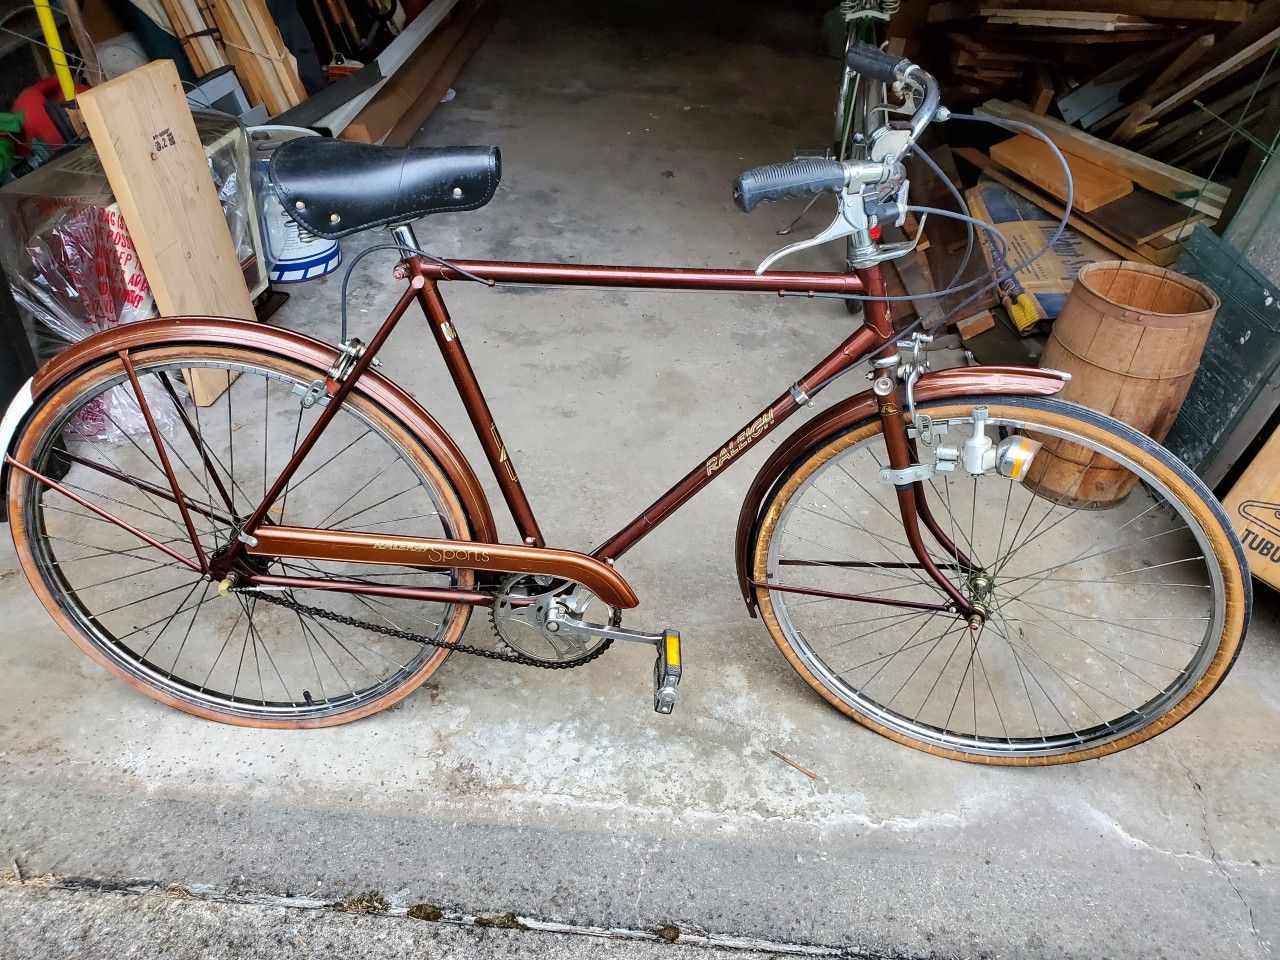 Vintage Raleigh dl 22 campus classic 2 speed coffee from 1976-78 Generator set is from France